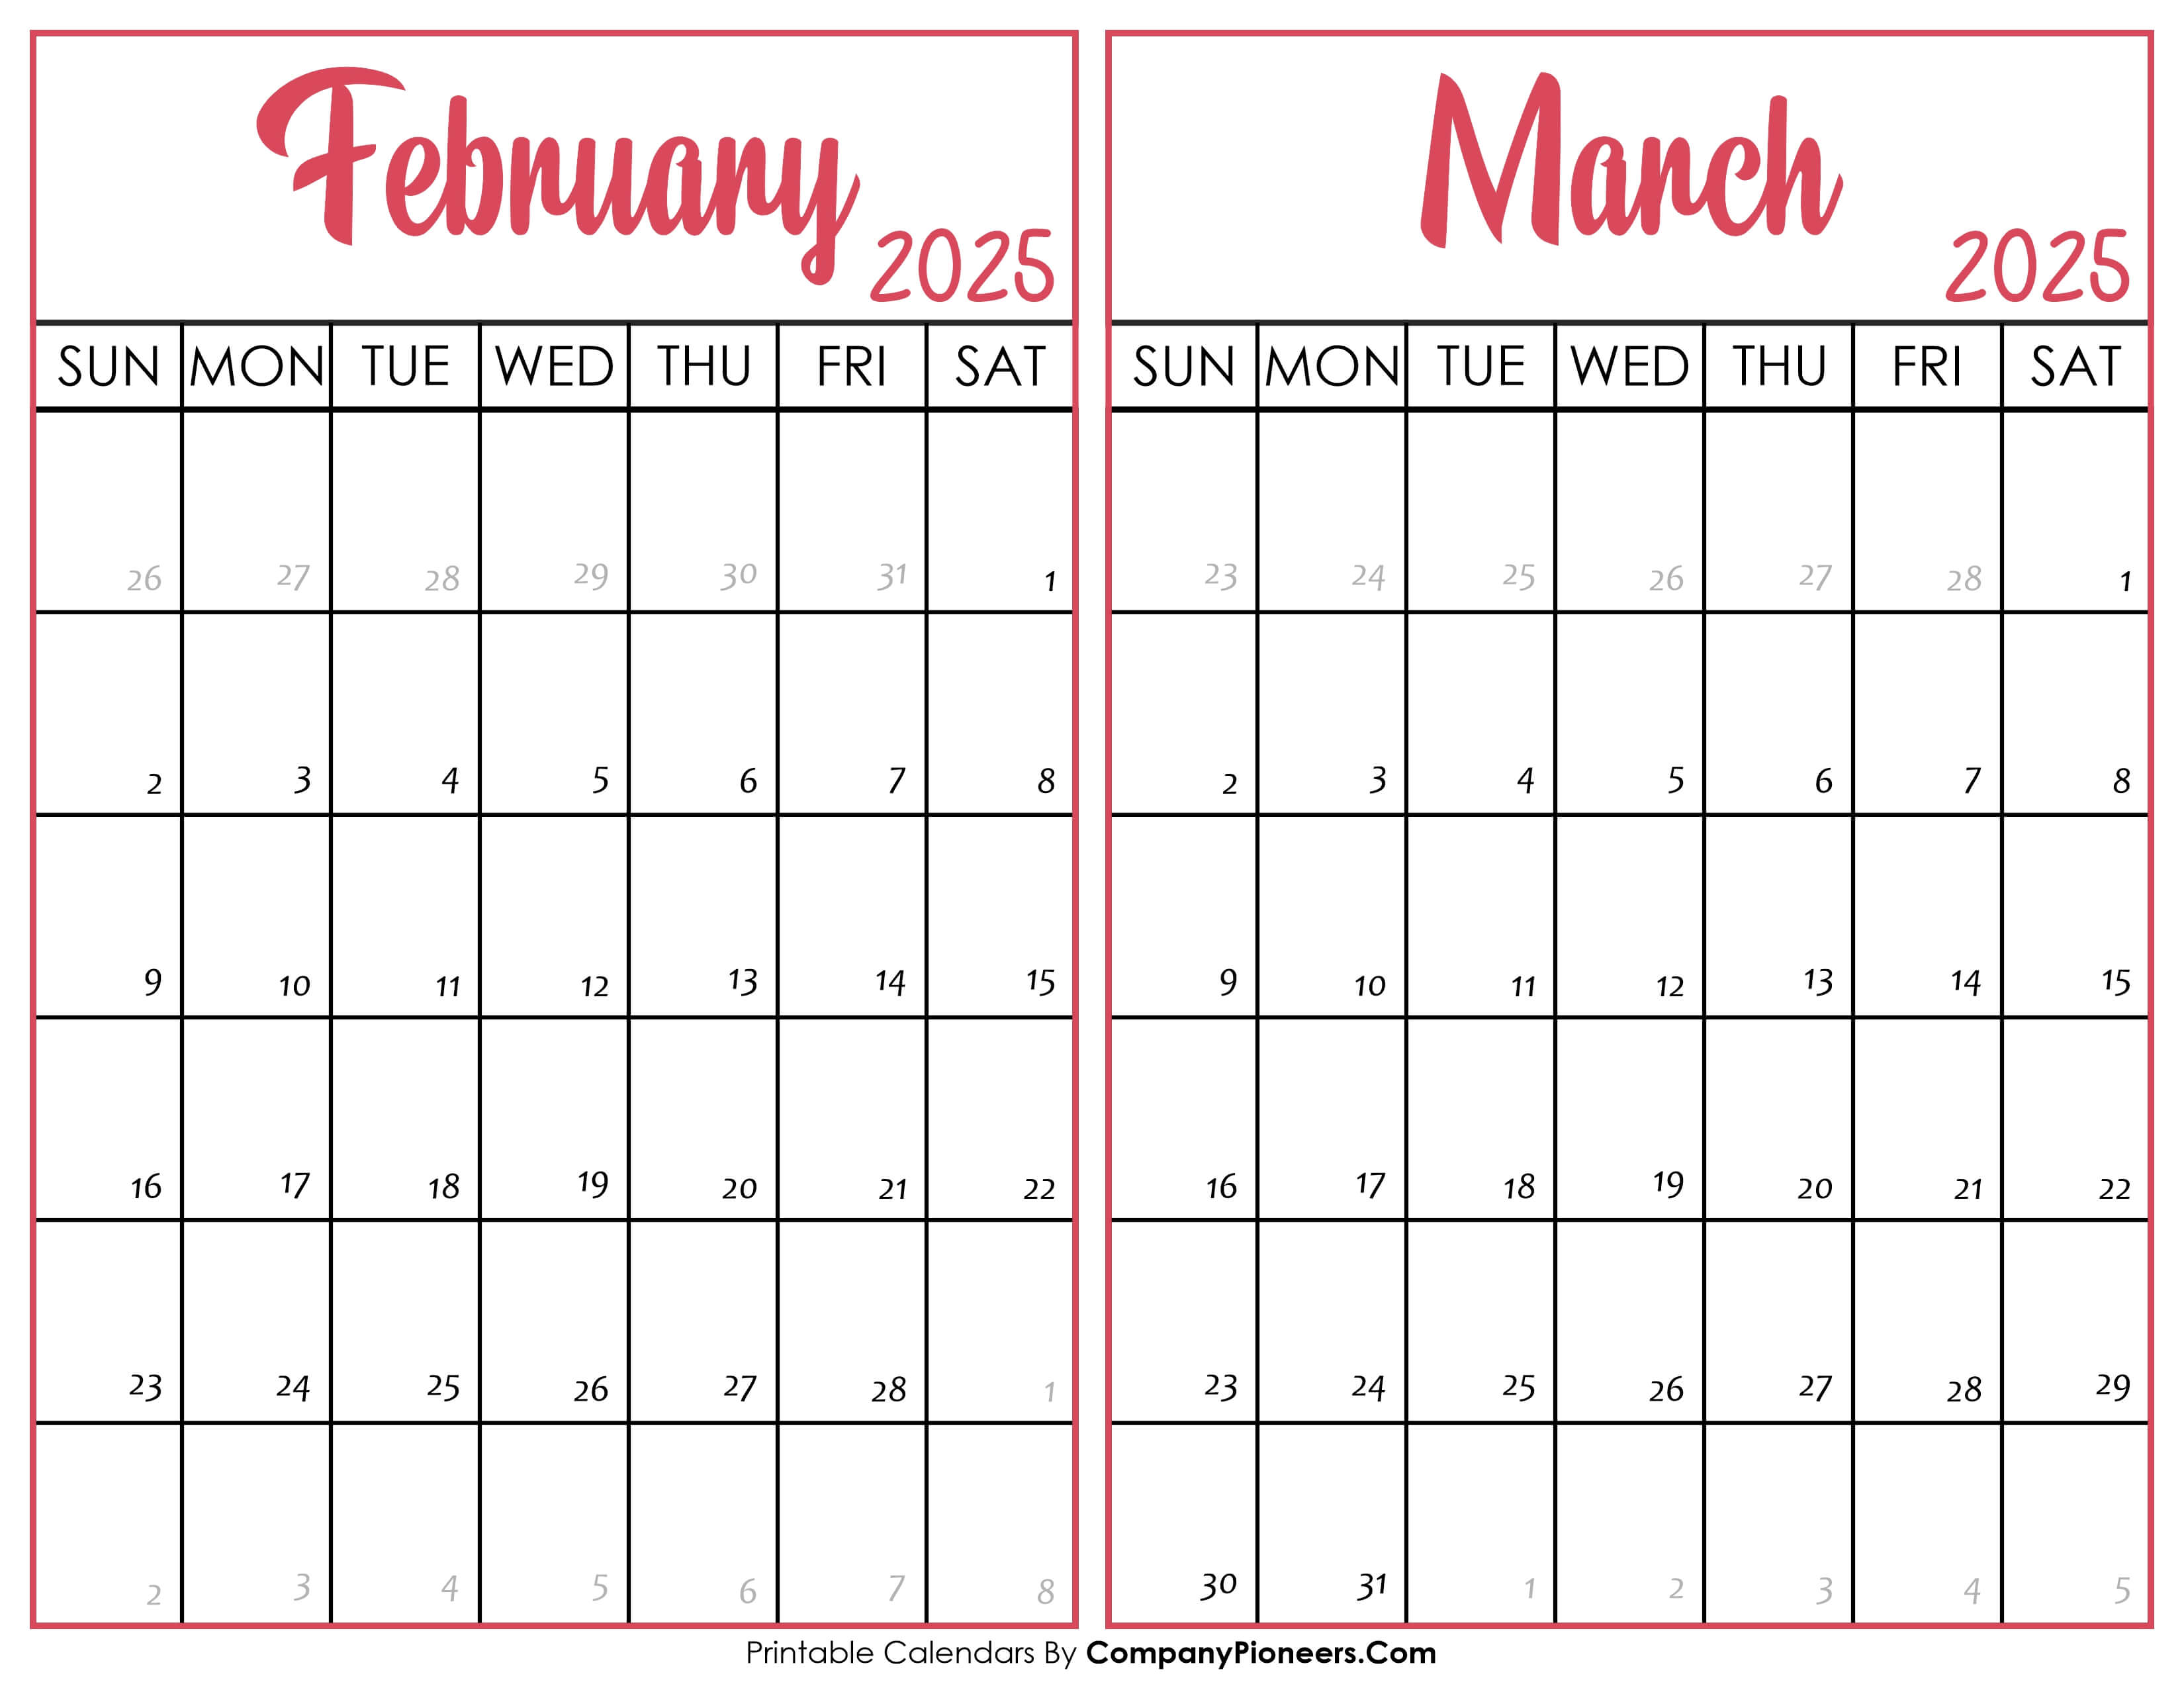 February and March Calendar 2025